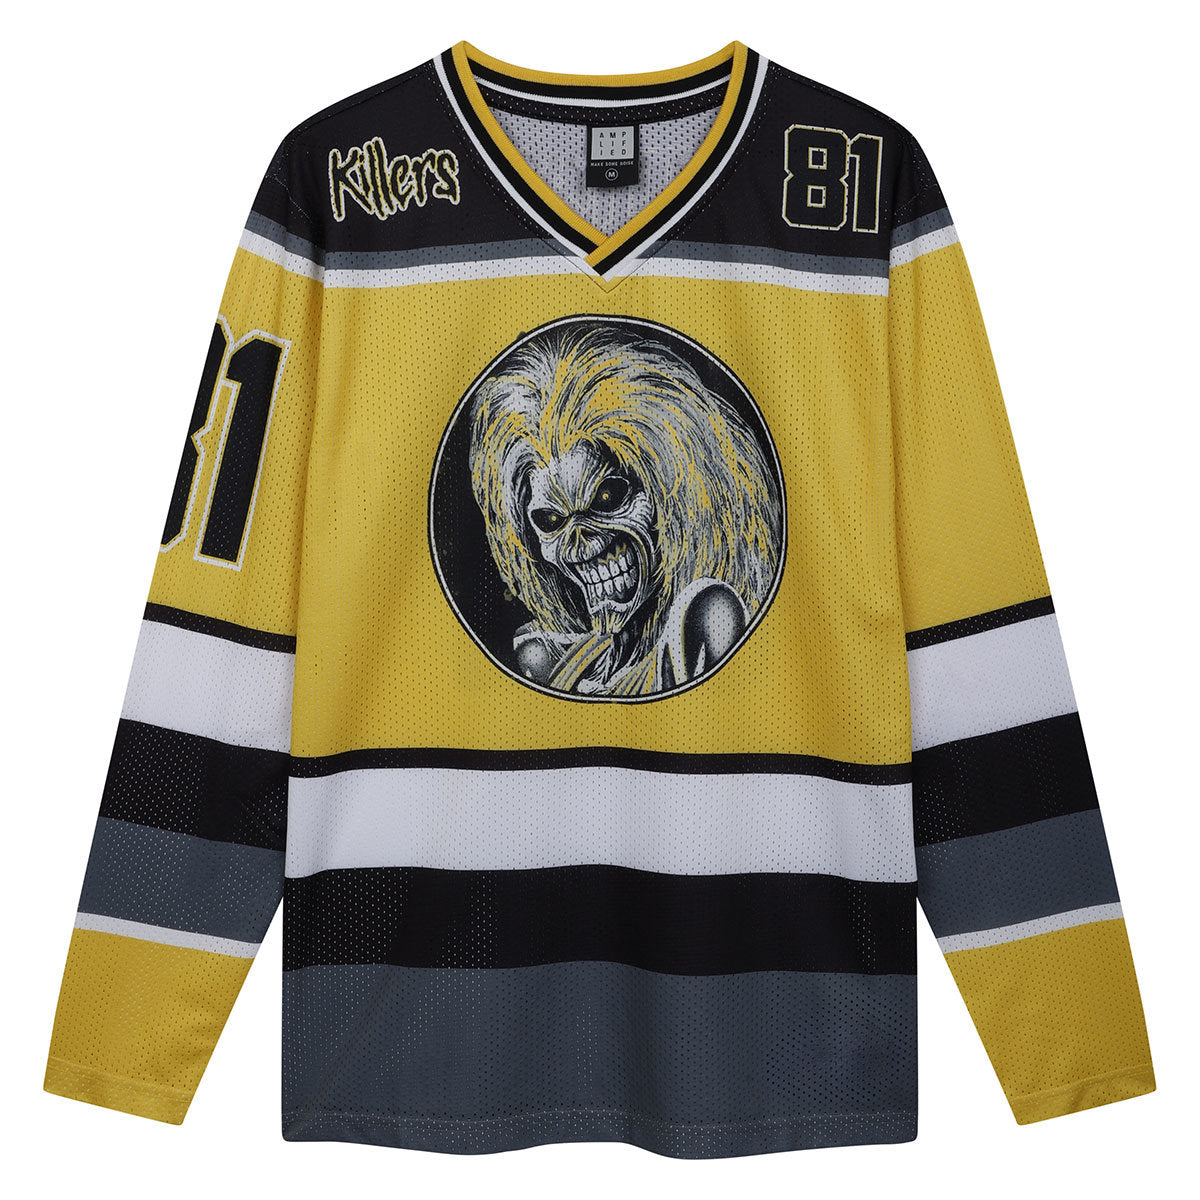 Amplified Iron Maiden Hockey Jersey - Official Licensed Product